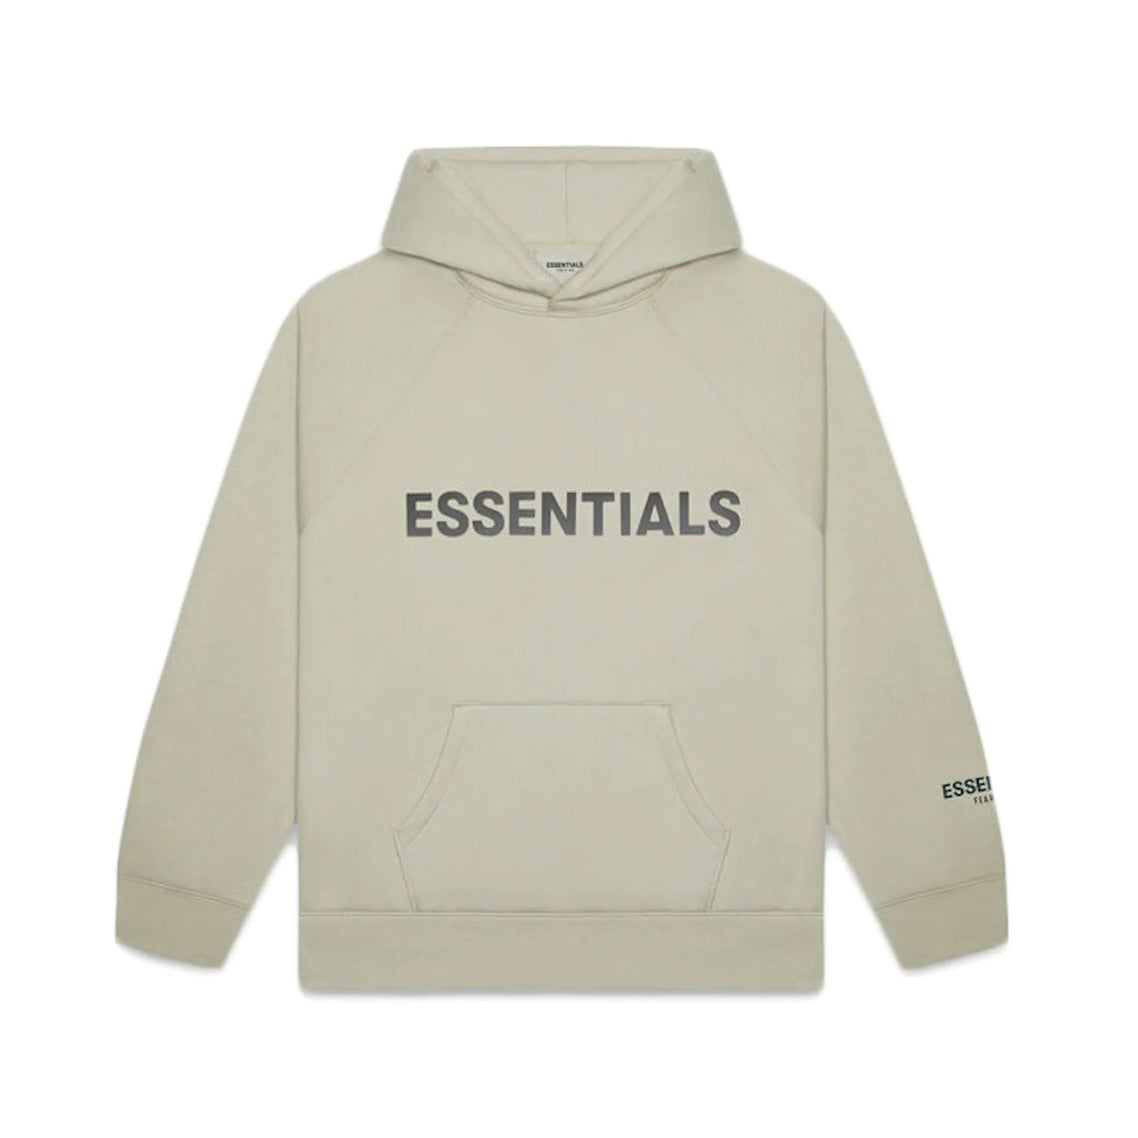 FEAR OF GOD ESSENTIALS PULLOVER HOODIE - MOSS